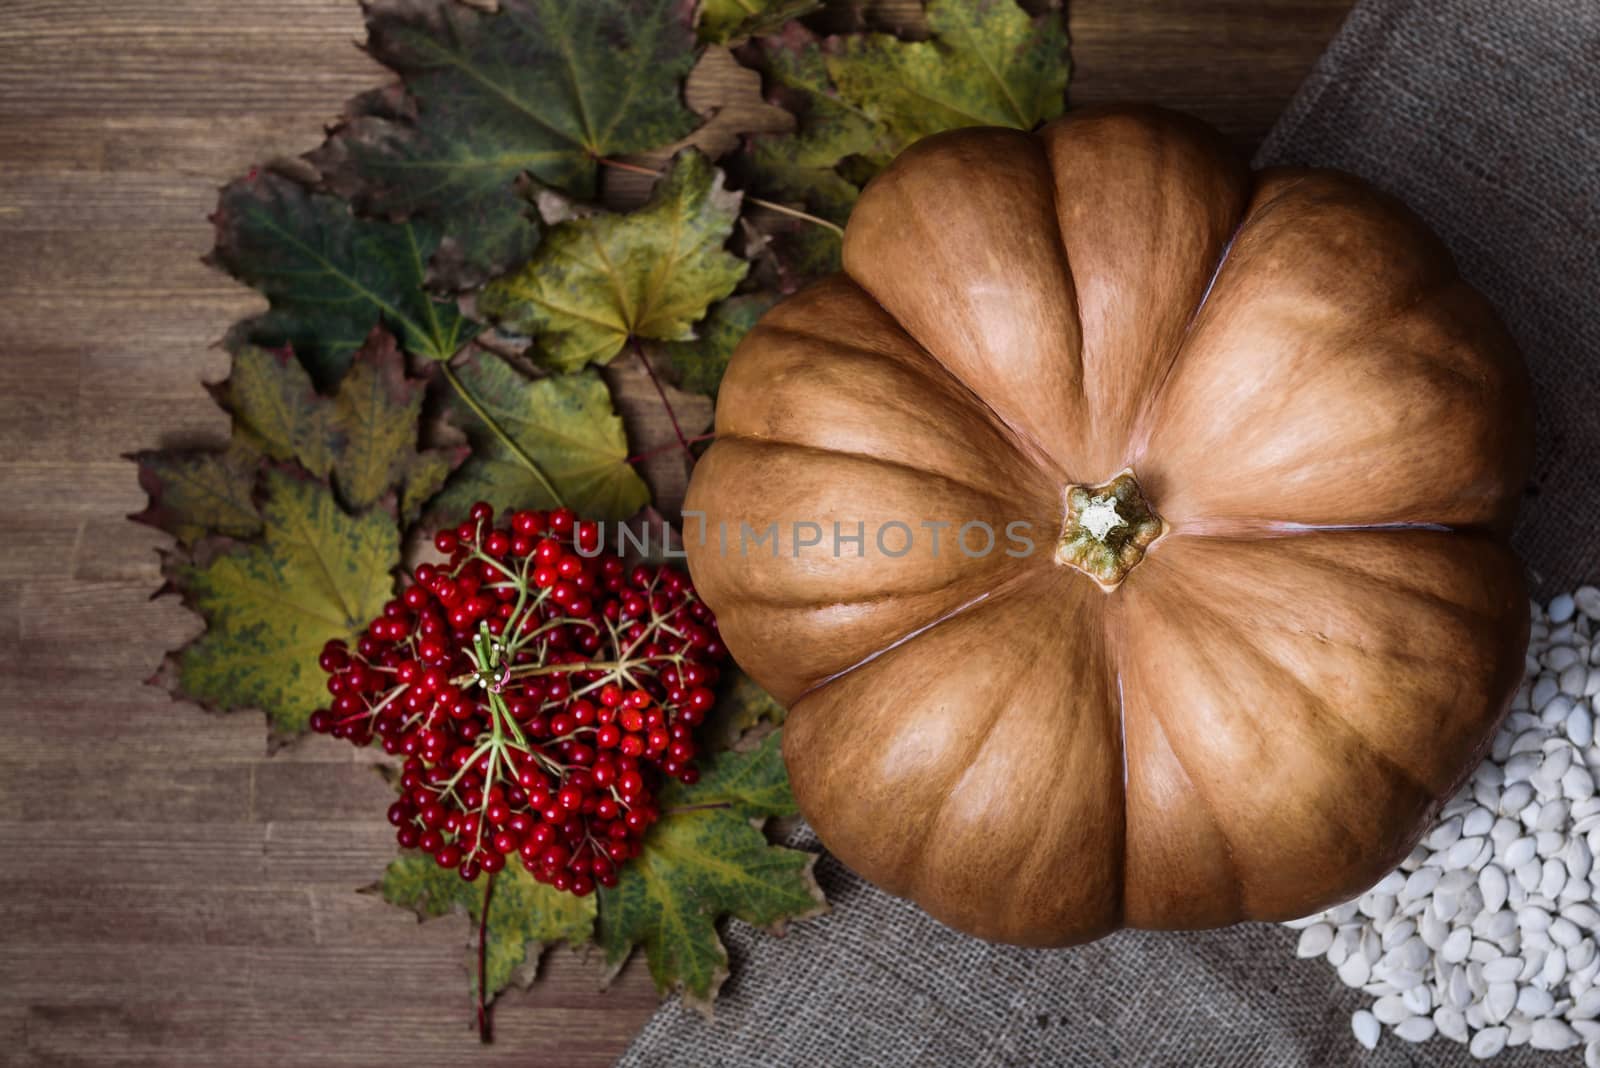 pumpkin lying on a wooden table with leaves, viburnum and seeds